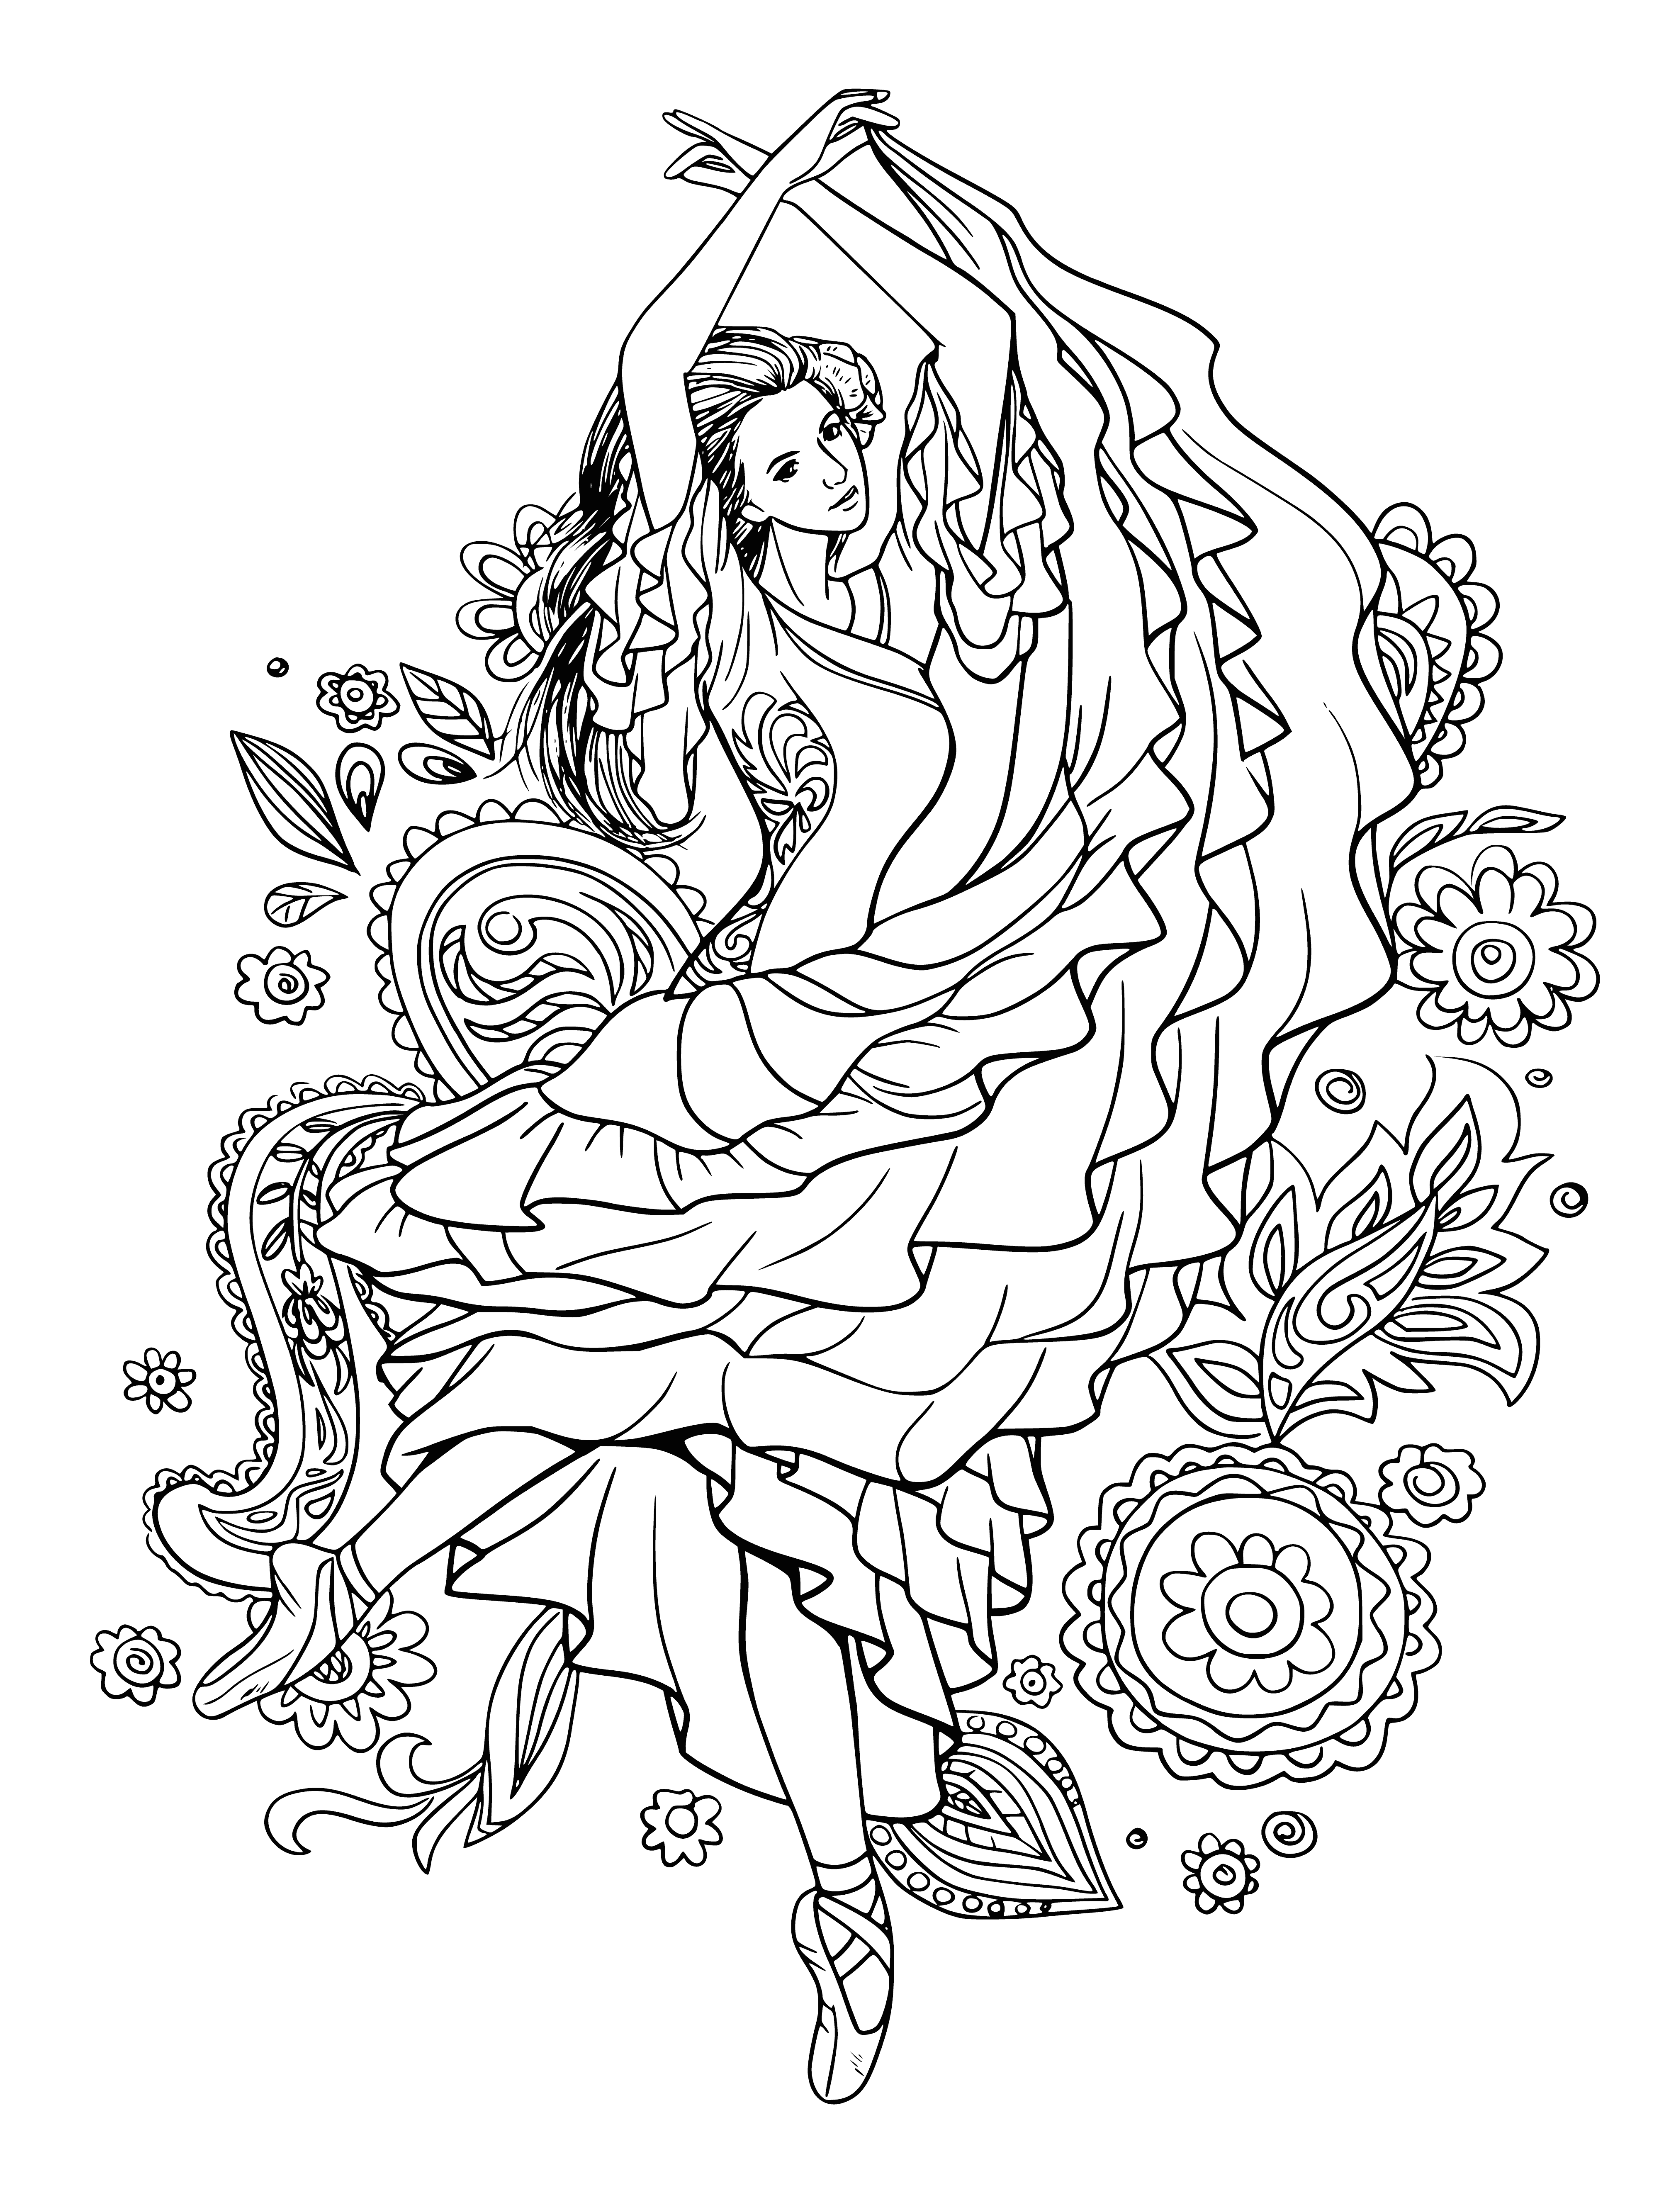 coloring page: A ballerina in a tutu dances with arms raised, wearing a crown of flowers, surrounded by hearts and stars.